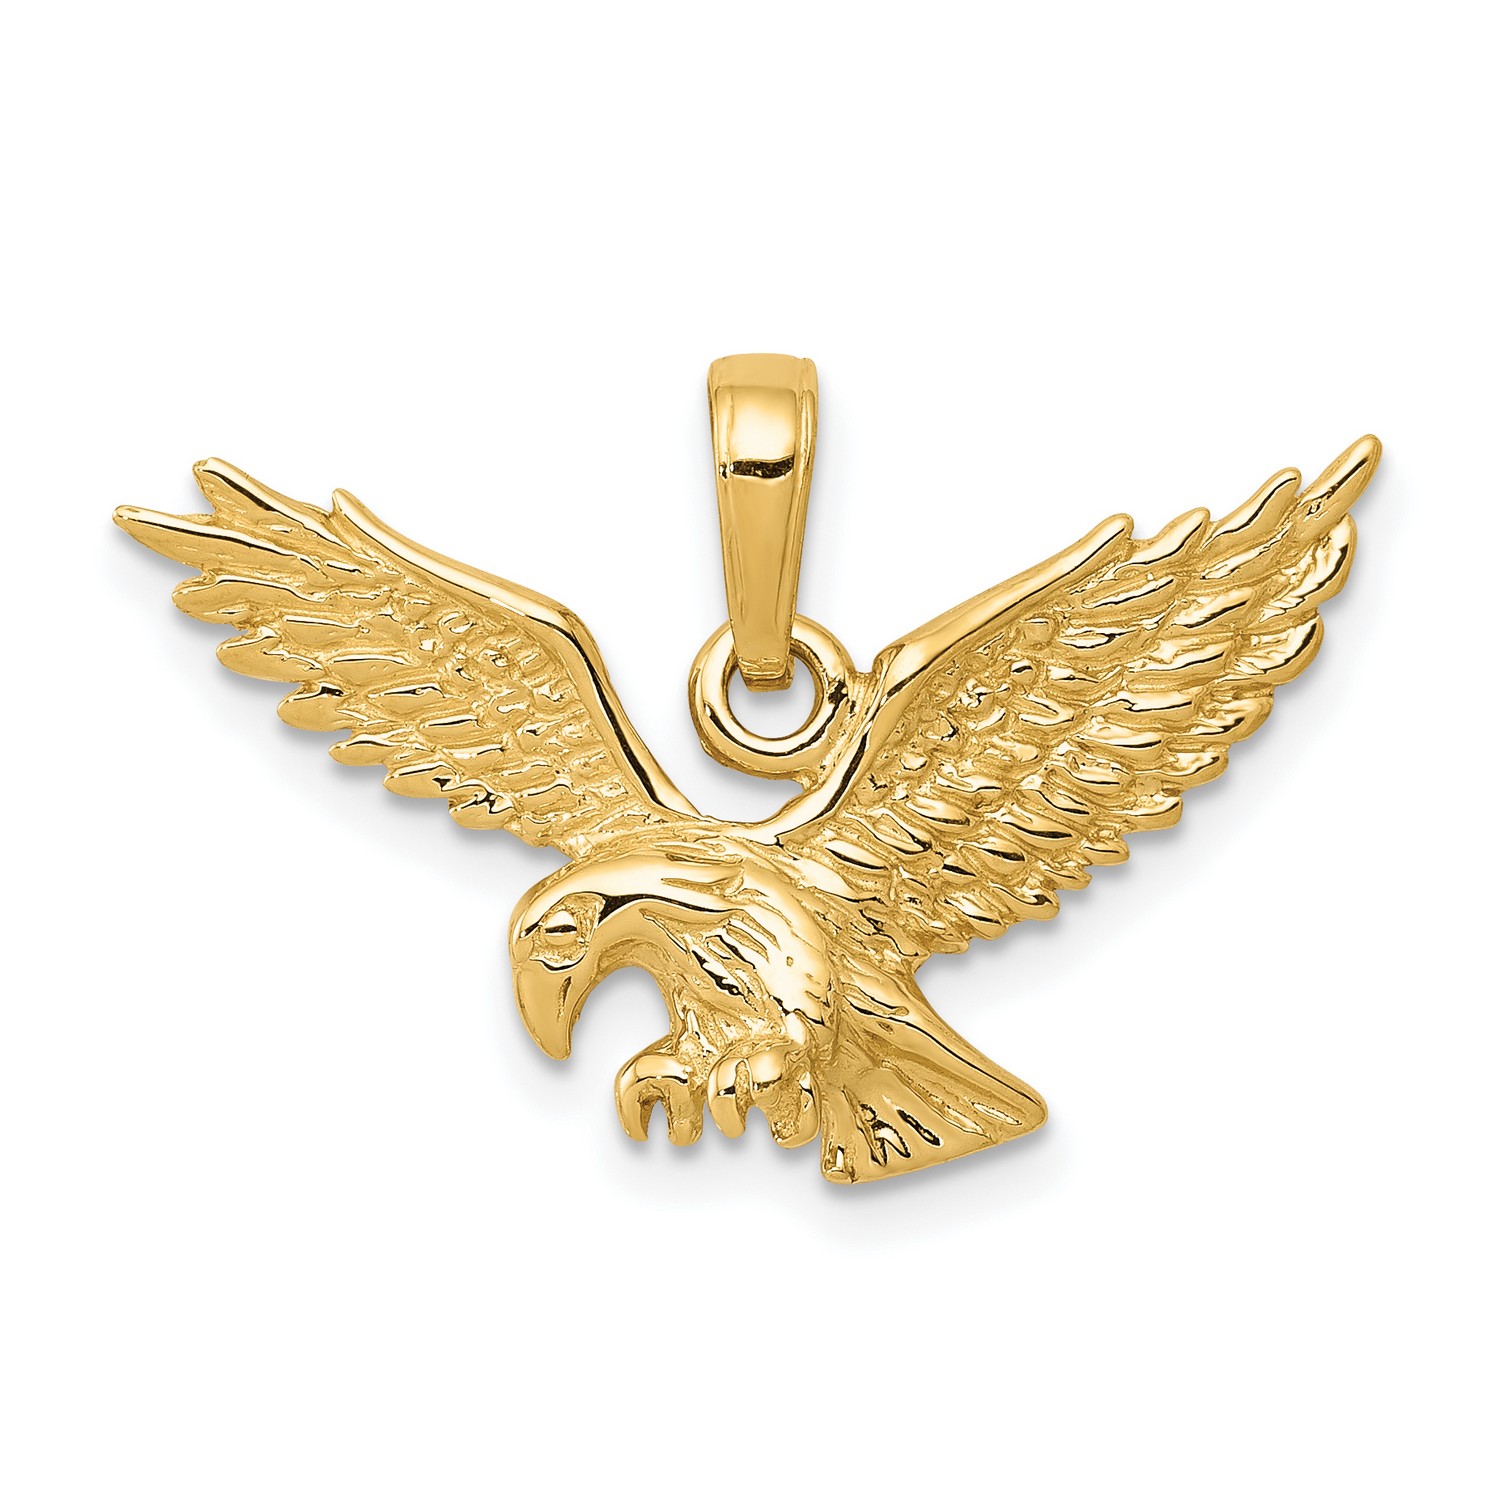 Pre-owned Jewelry Stores Network 14k Yellow Gold Solid Polished Flying Eagle Charm Pendant